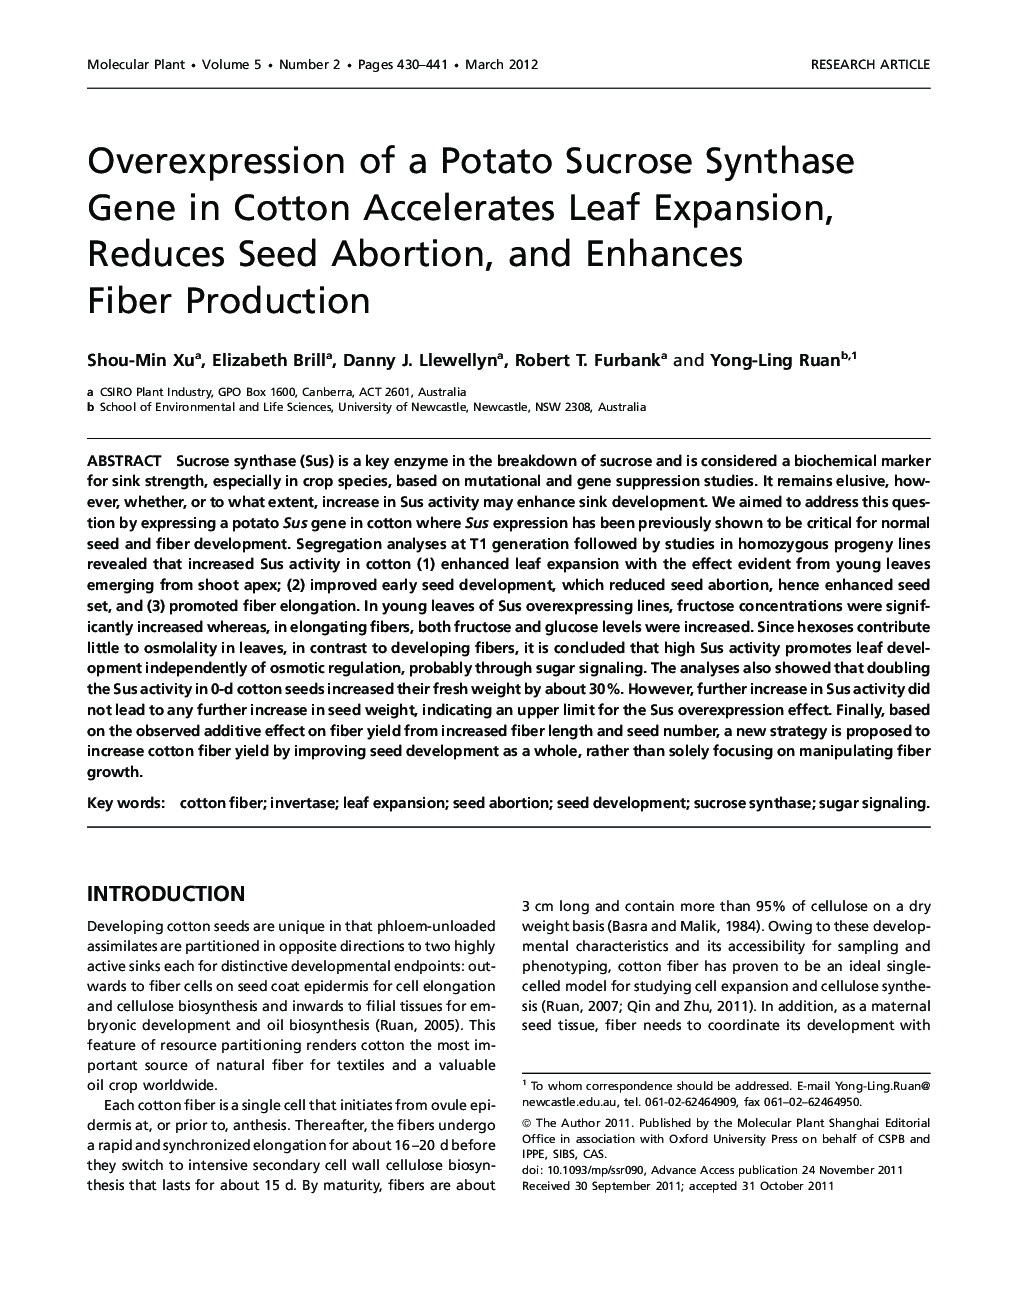 Overexpression of a Potato Sucrose Synthase Gene in Cotton Accelerates Leaf Expansion, Reduces Seed Abortion, and Enhances Fiber Production 